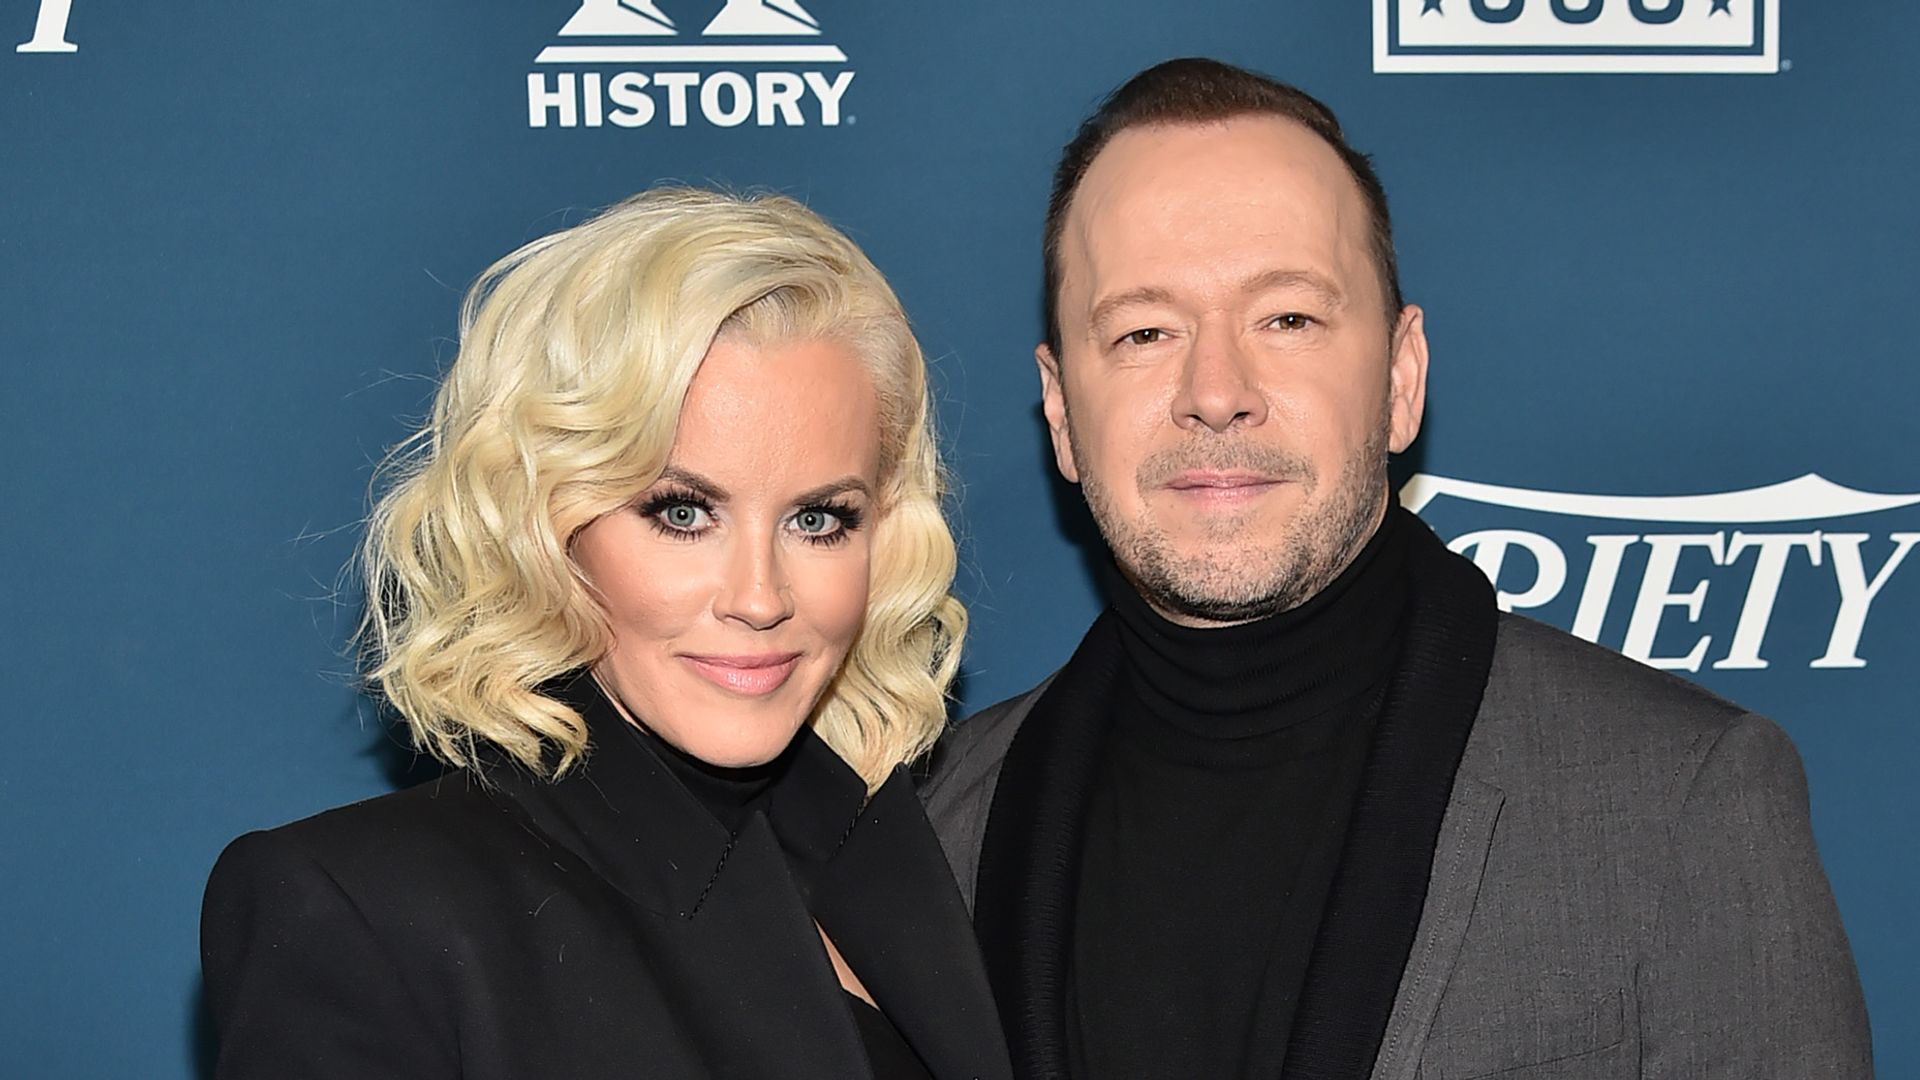 Jenny McCarthy and Donnie Wahlberg attend Variety's 3rd Annual Salute To Service at Cipriani 25 Broadway on November 06, 2019 in New York City